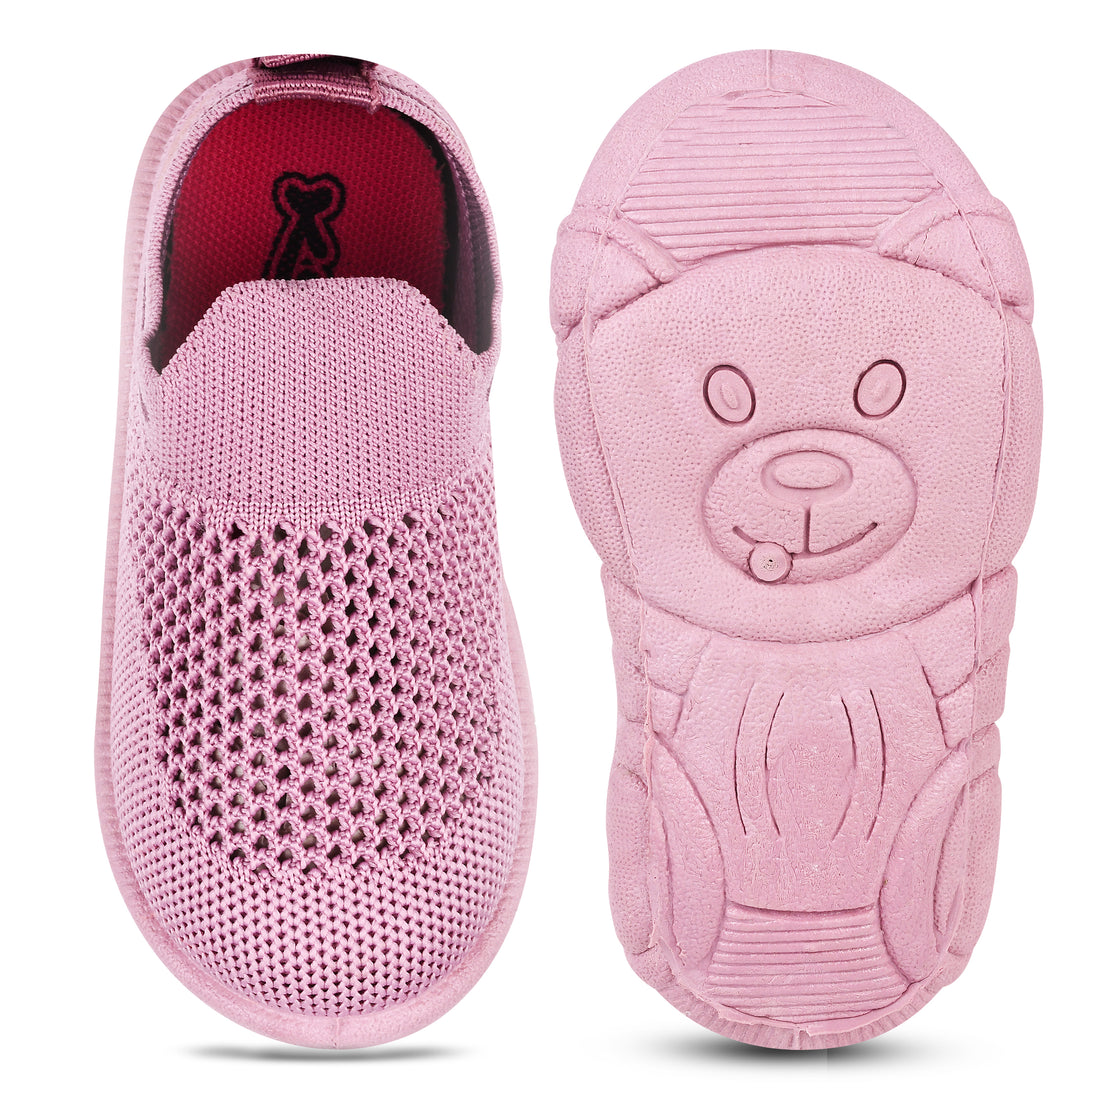 Kats FLYKIDS-15 Kids unisex Slip on Trendy Boys and Girls Casuals with Musical Chu-chu Sound Shoes (9 to 24 Months)